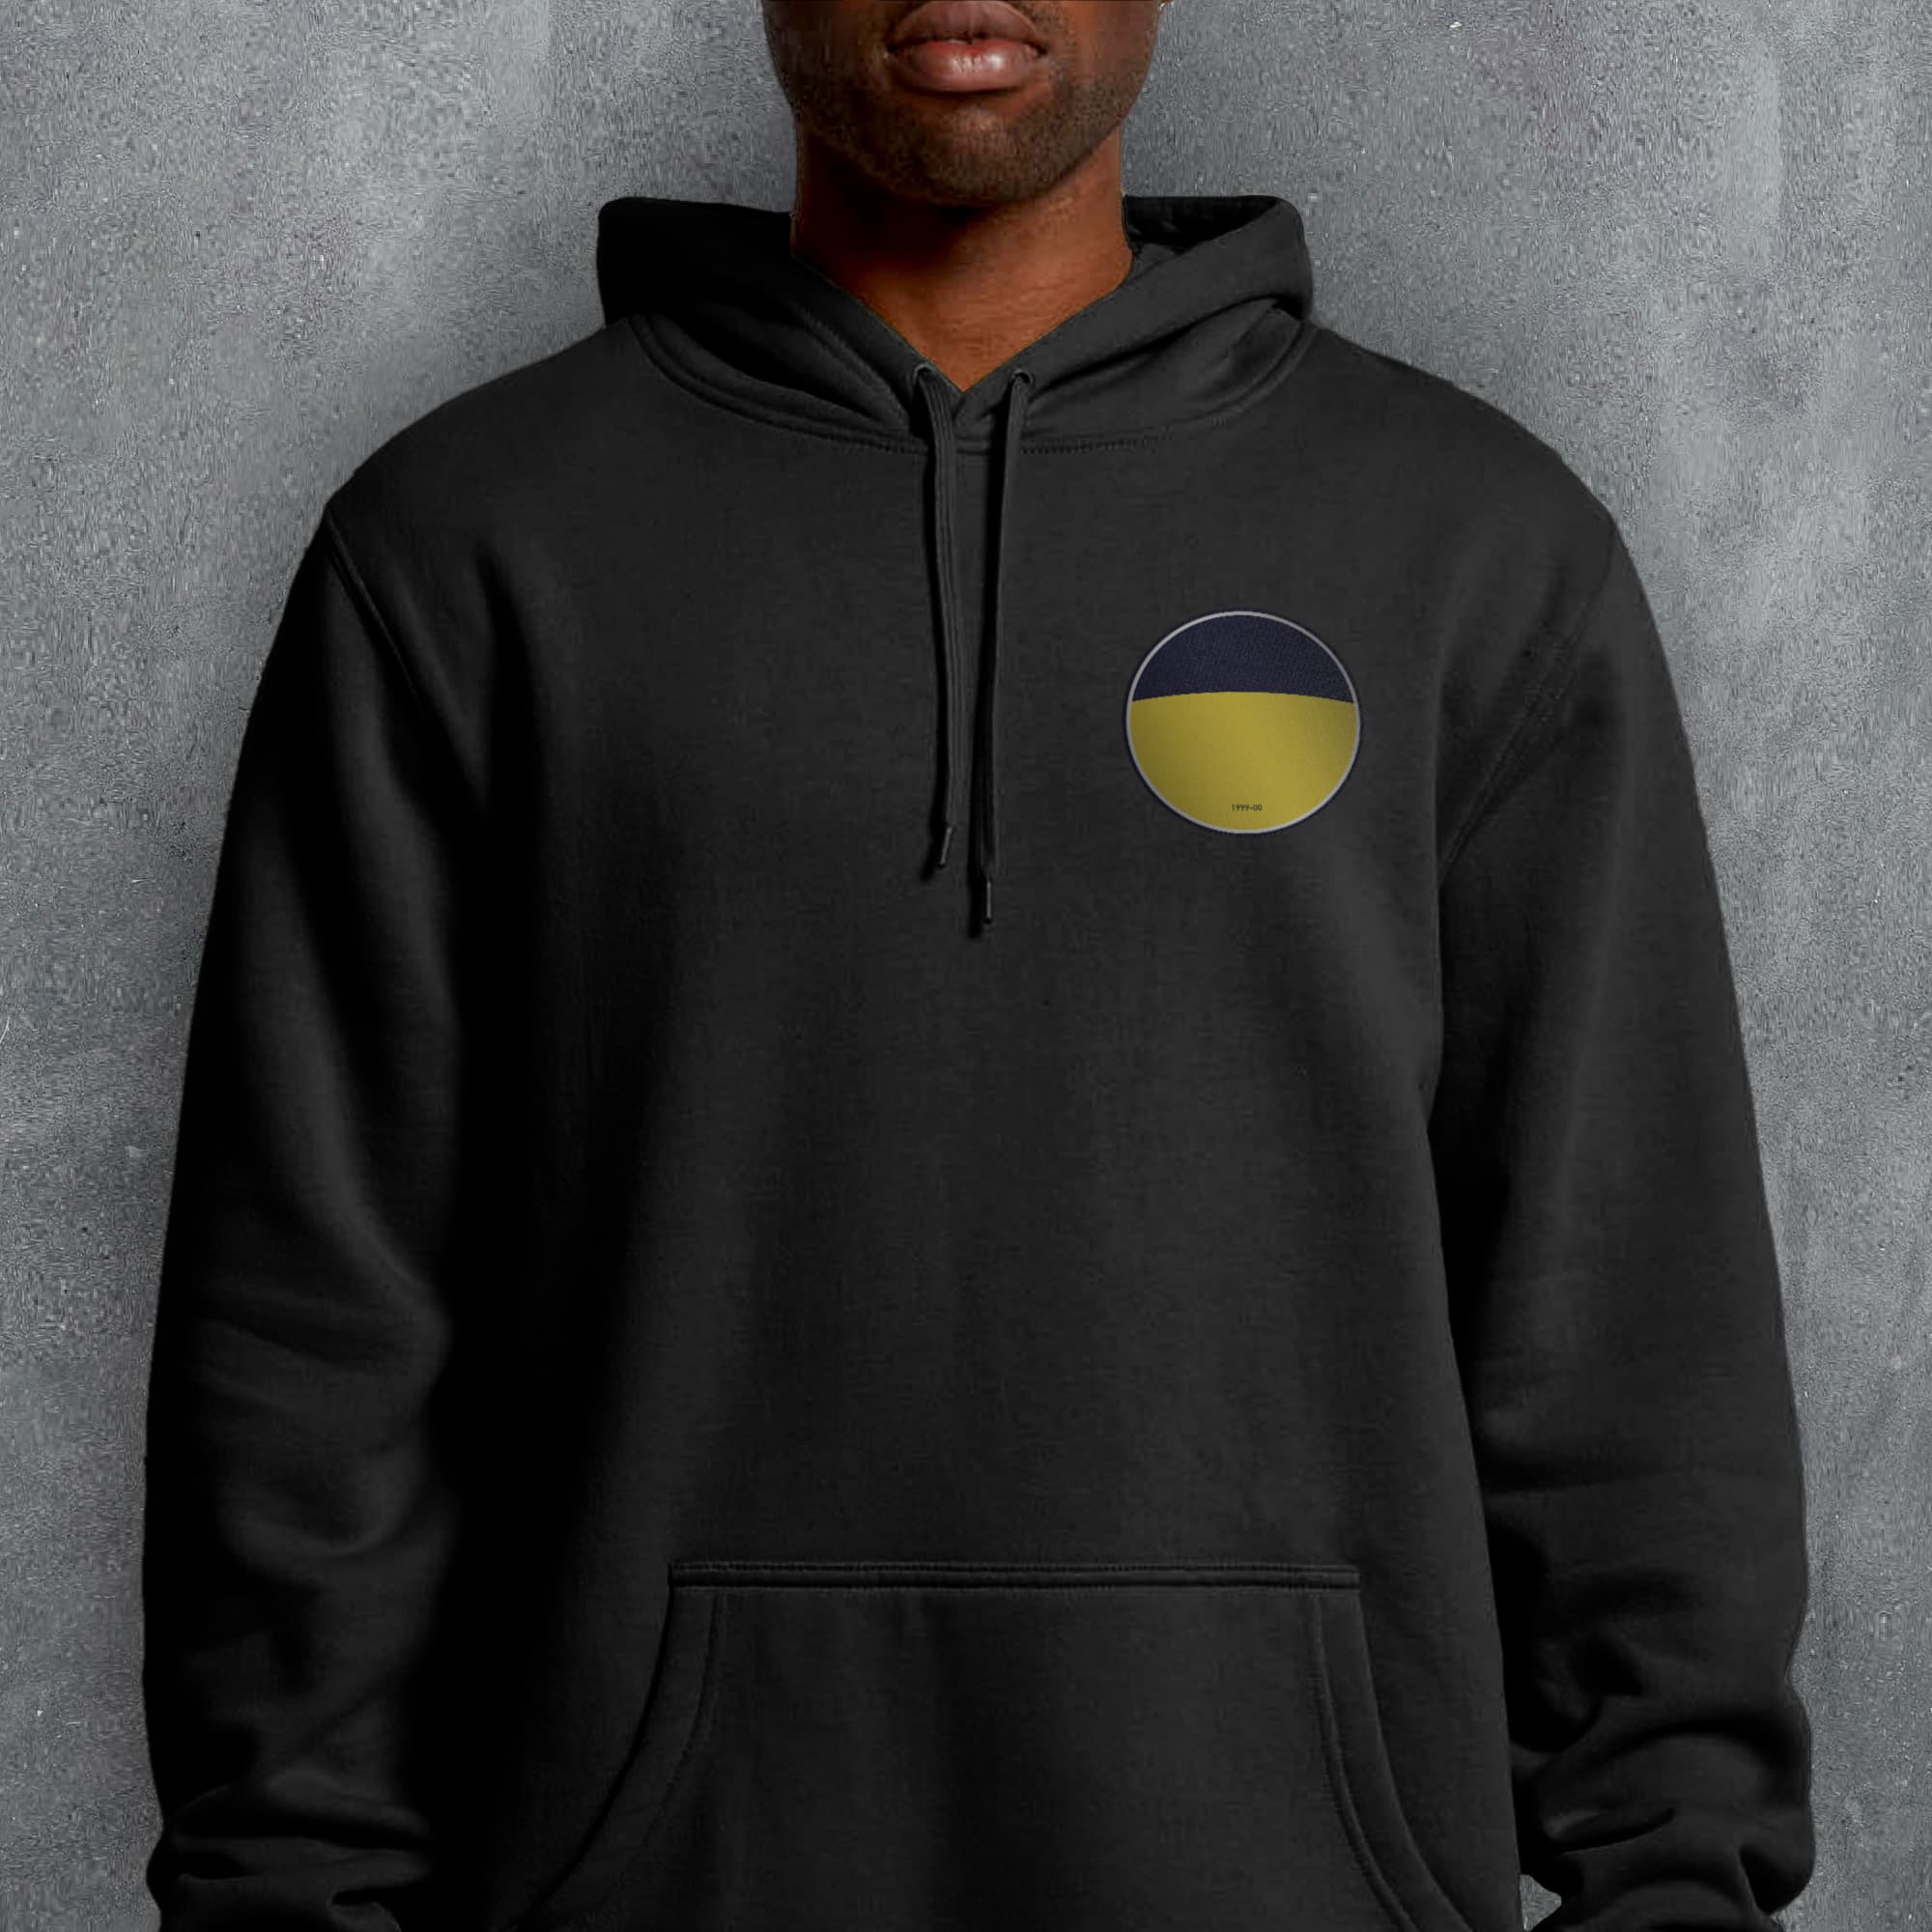 a man wearing a black hoodie with a yellow circle on it